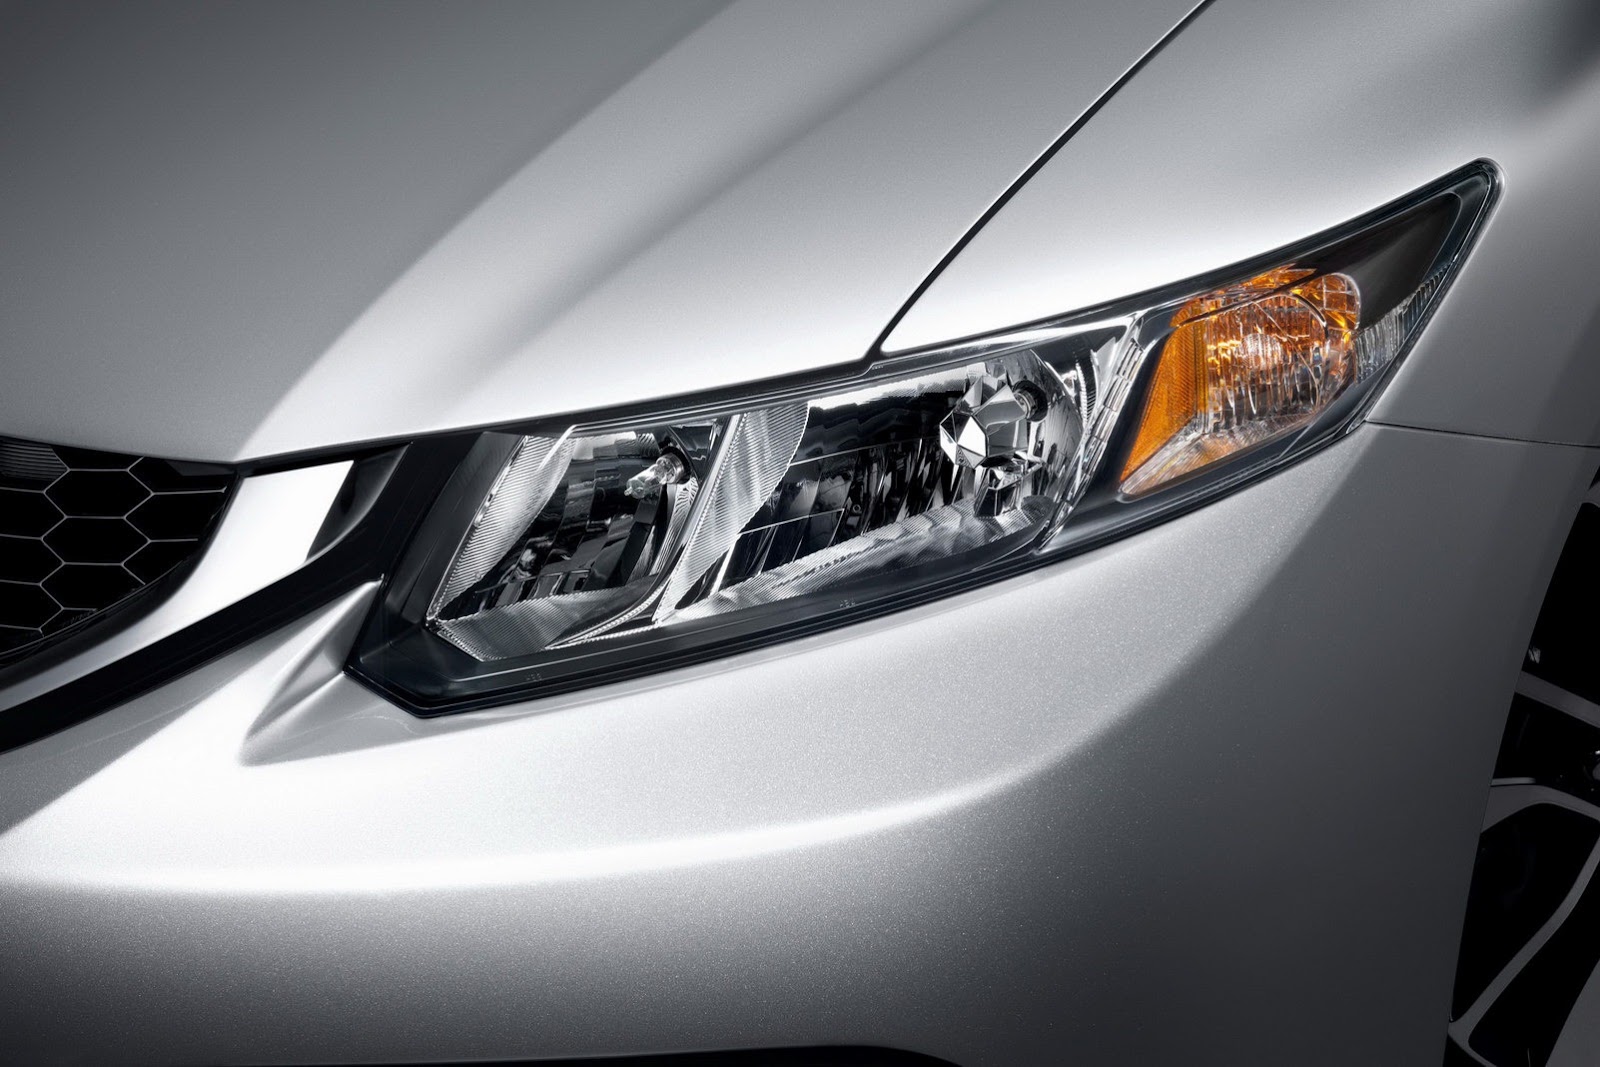 Honda Refreshes Civic for 2013 with New Grille and Added Kit ...